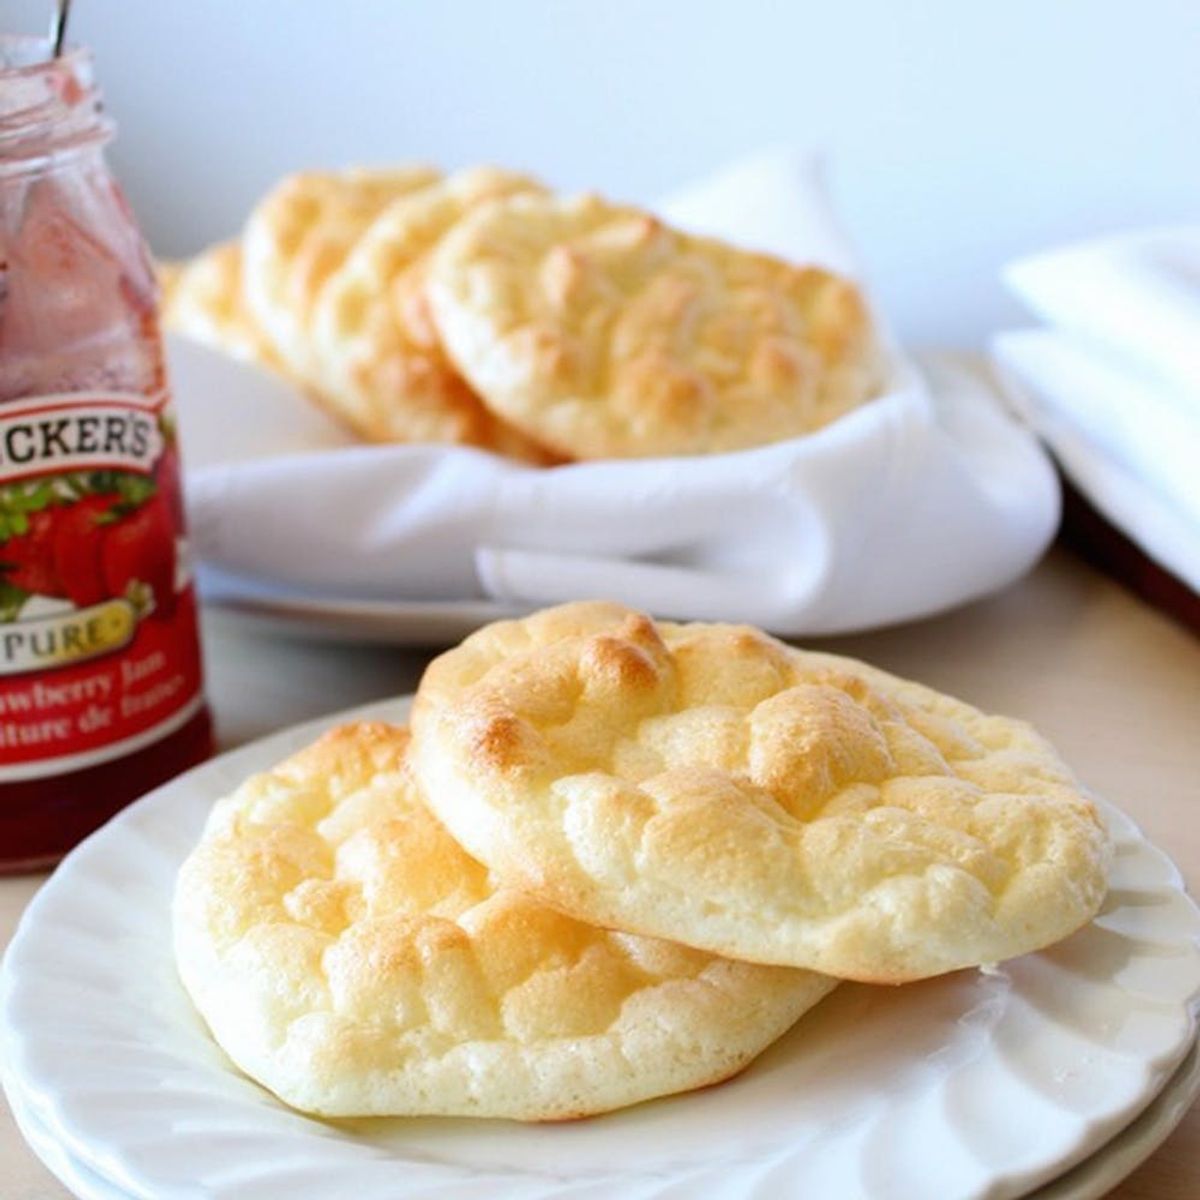 These Cloud Bread Recipes Will Change the Way You Think About Gluten